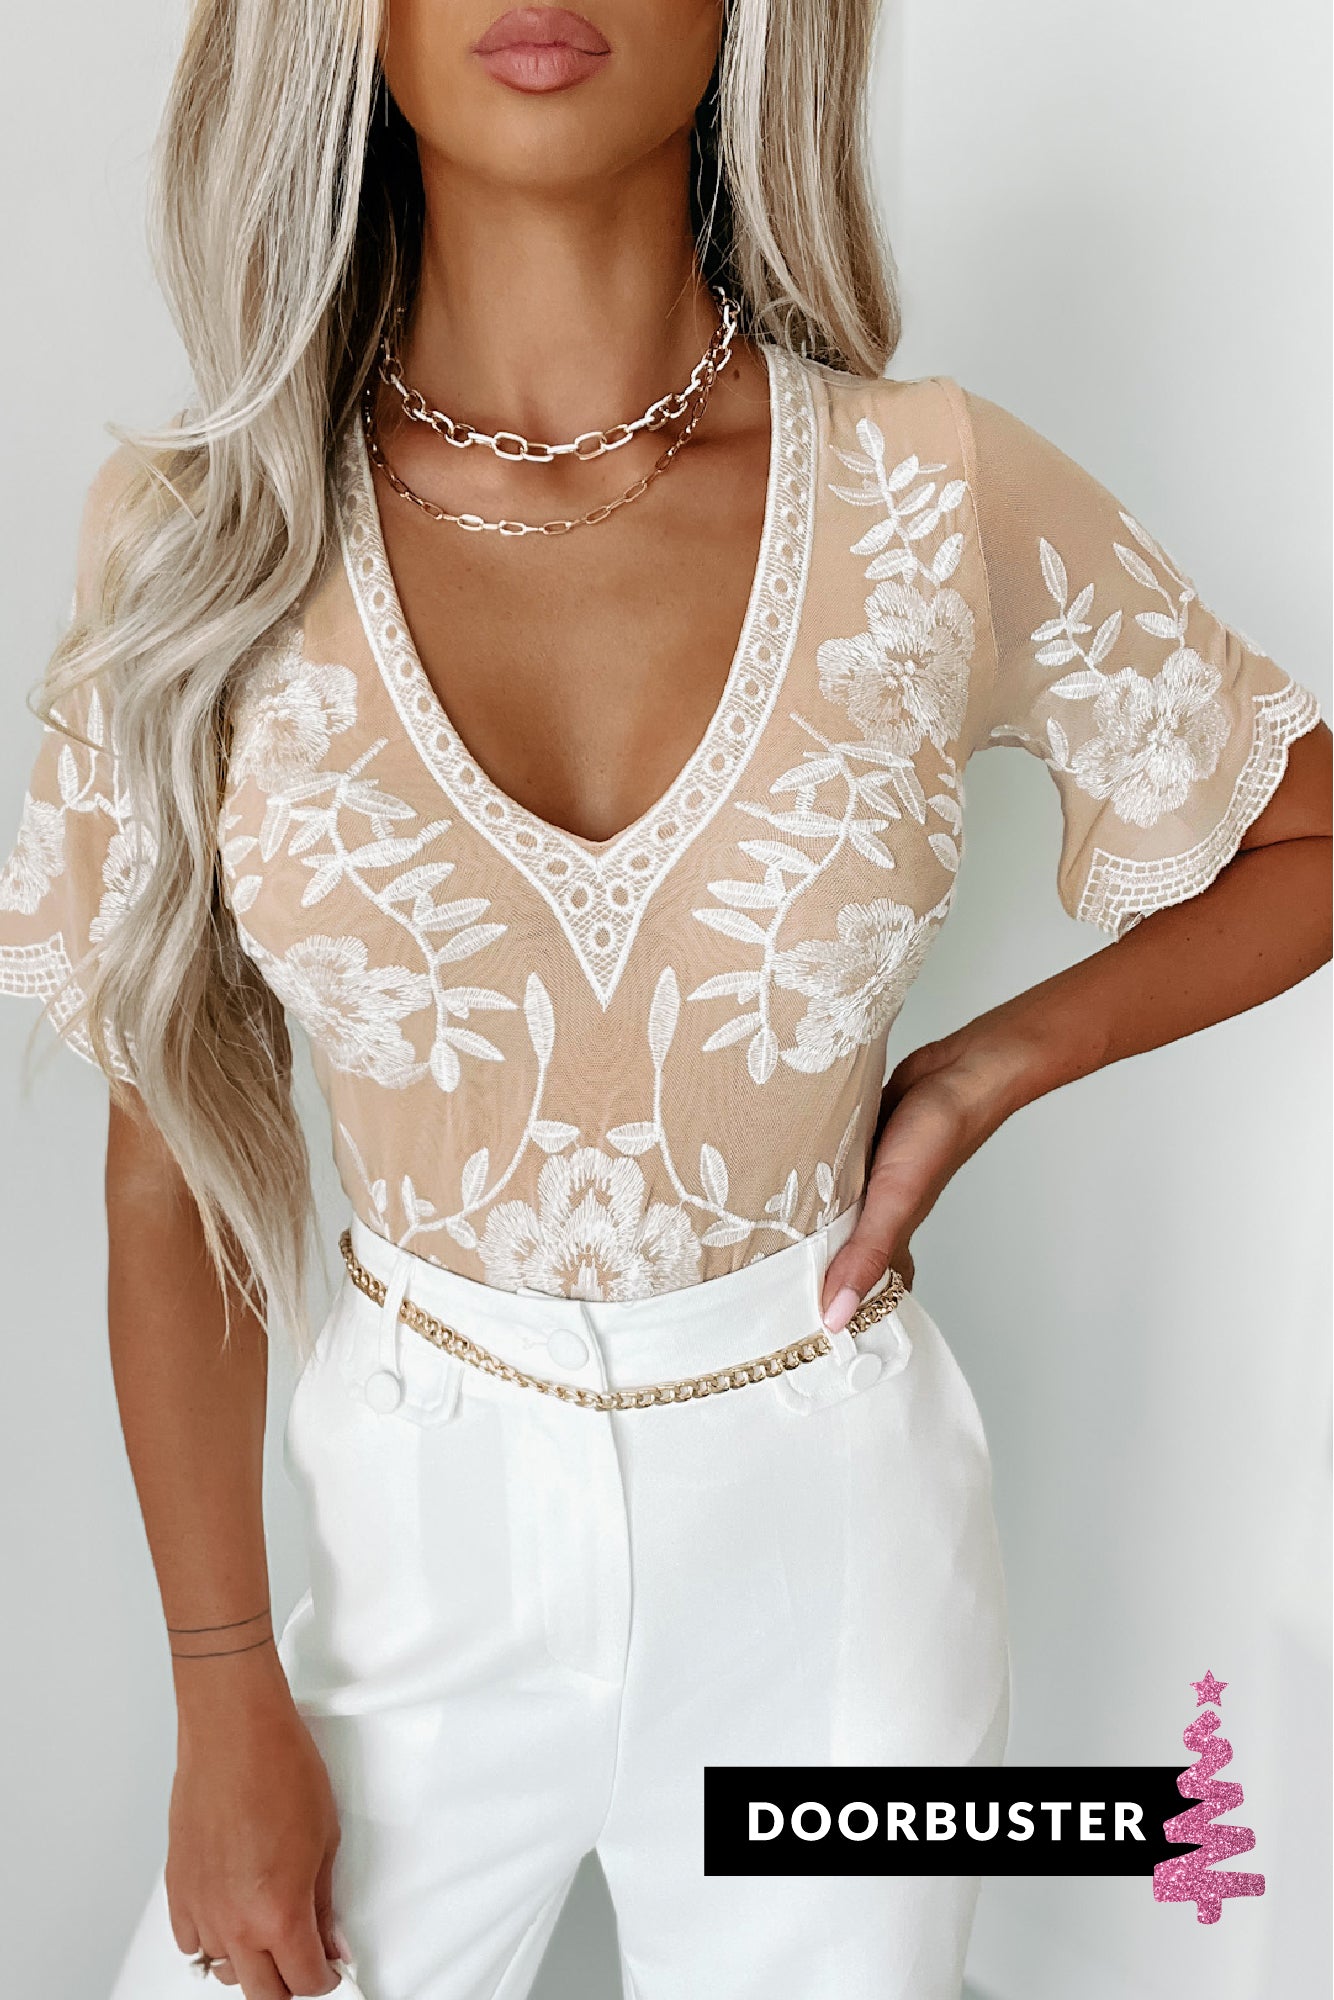 Follow Your Fancy Embroidered Bodysuit (Nude/White)